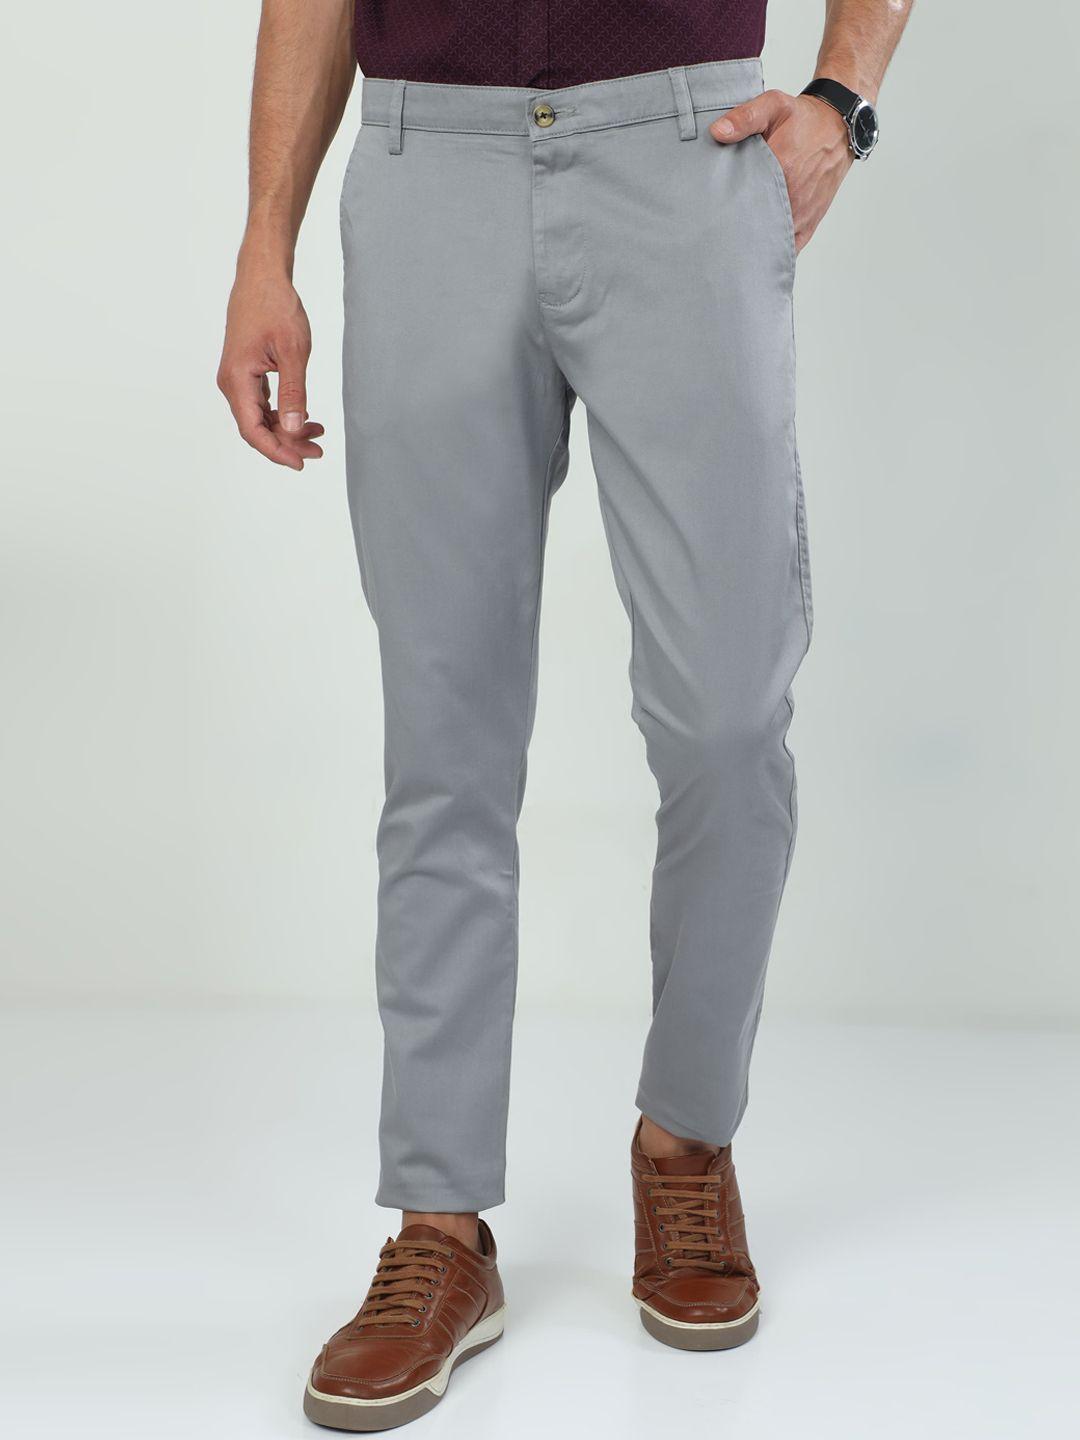 classic polo men cotton chinos trousers